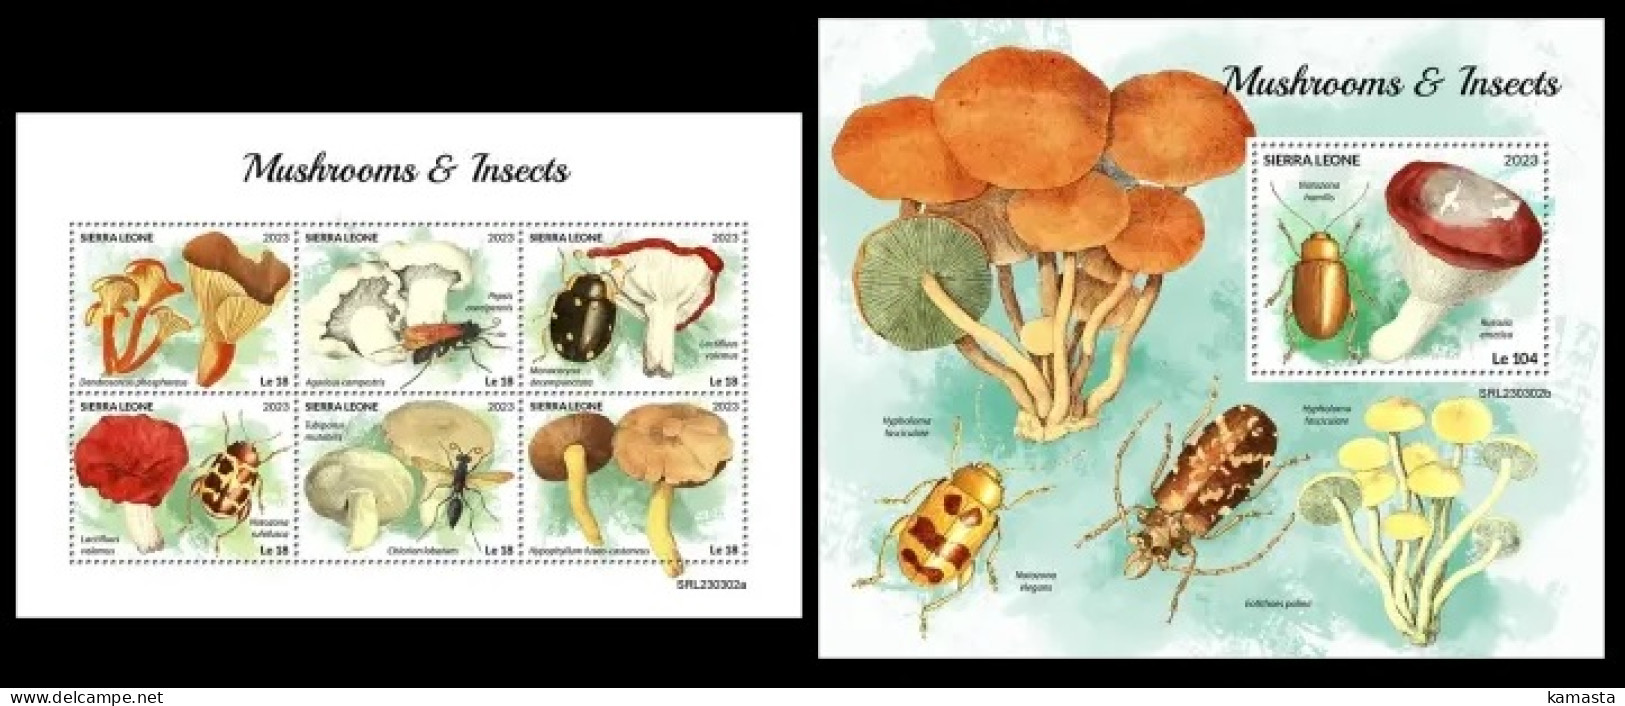 Sierra Leone  2023 Mushrooms & Insects. (302) OFFICIAL ISSUE - Pilze